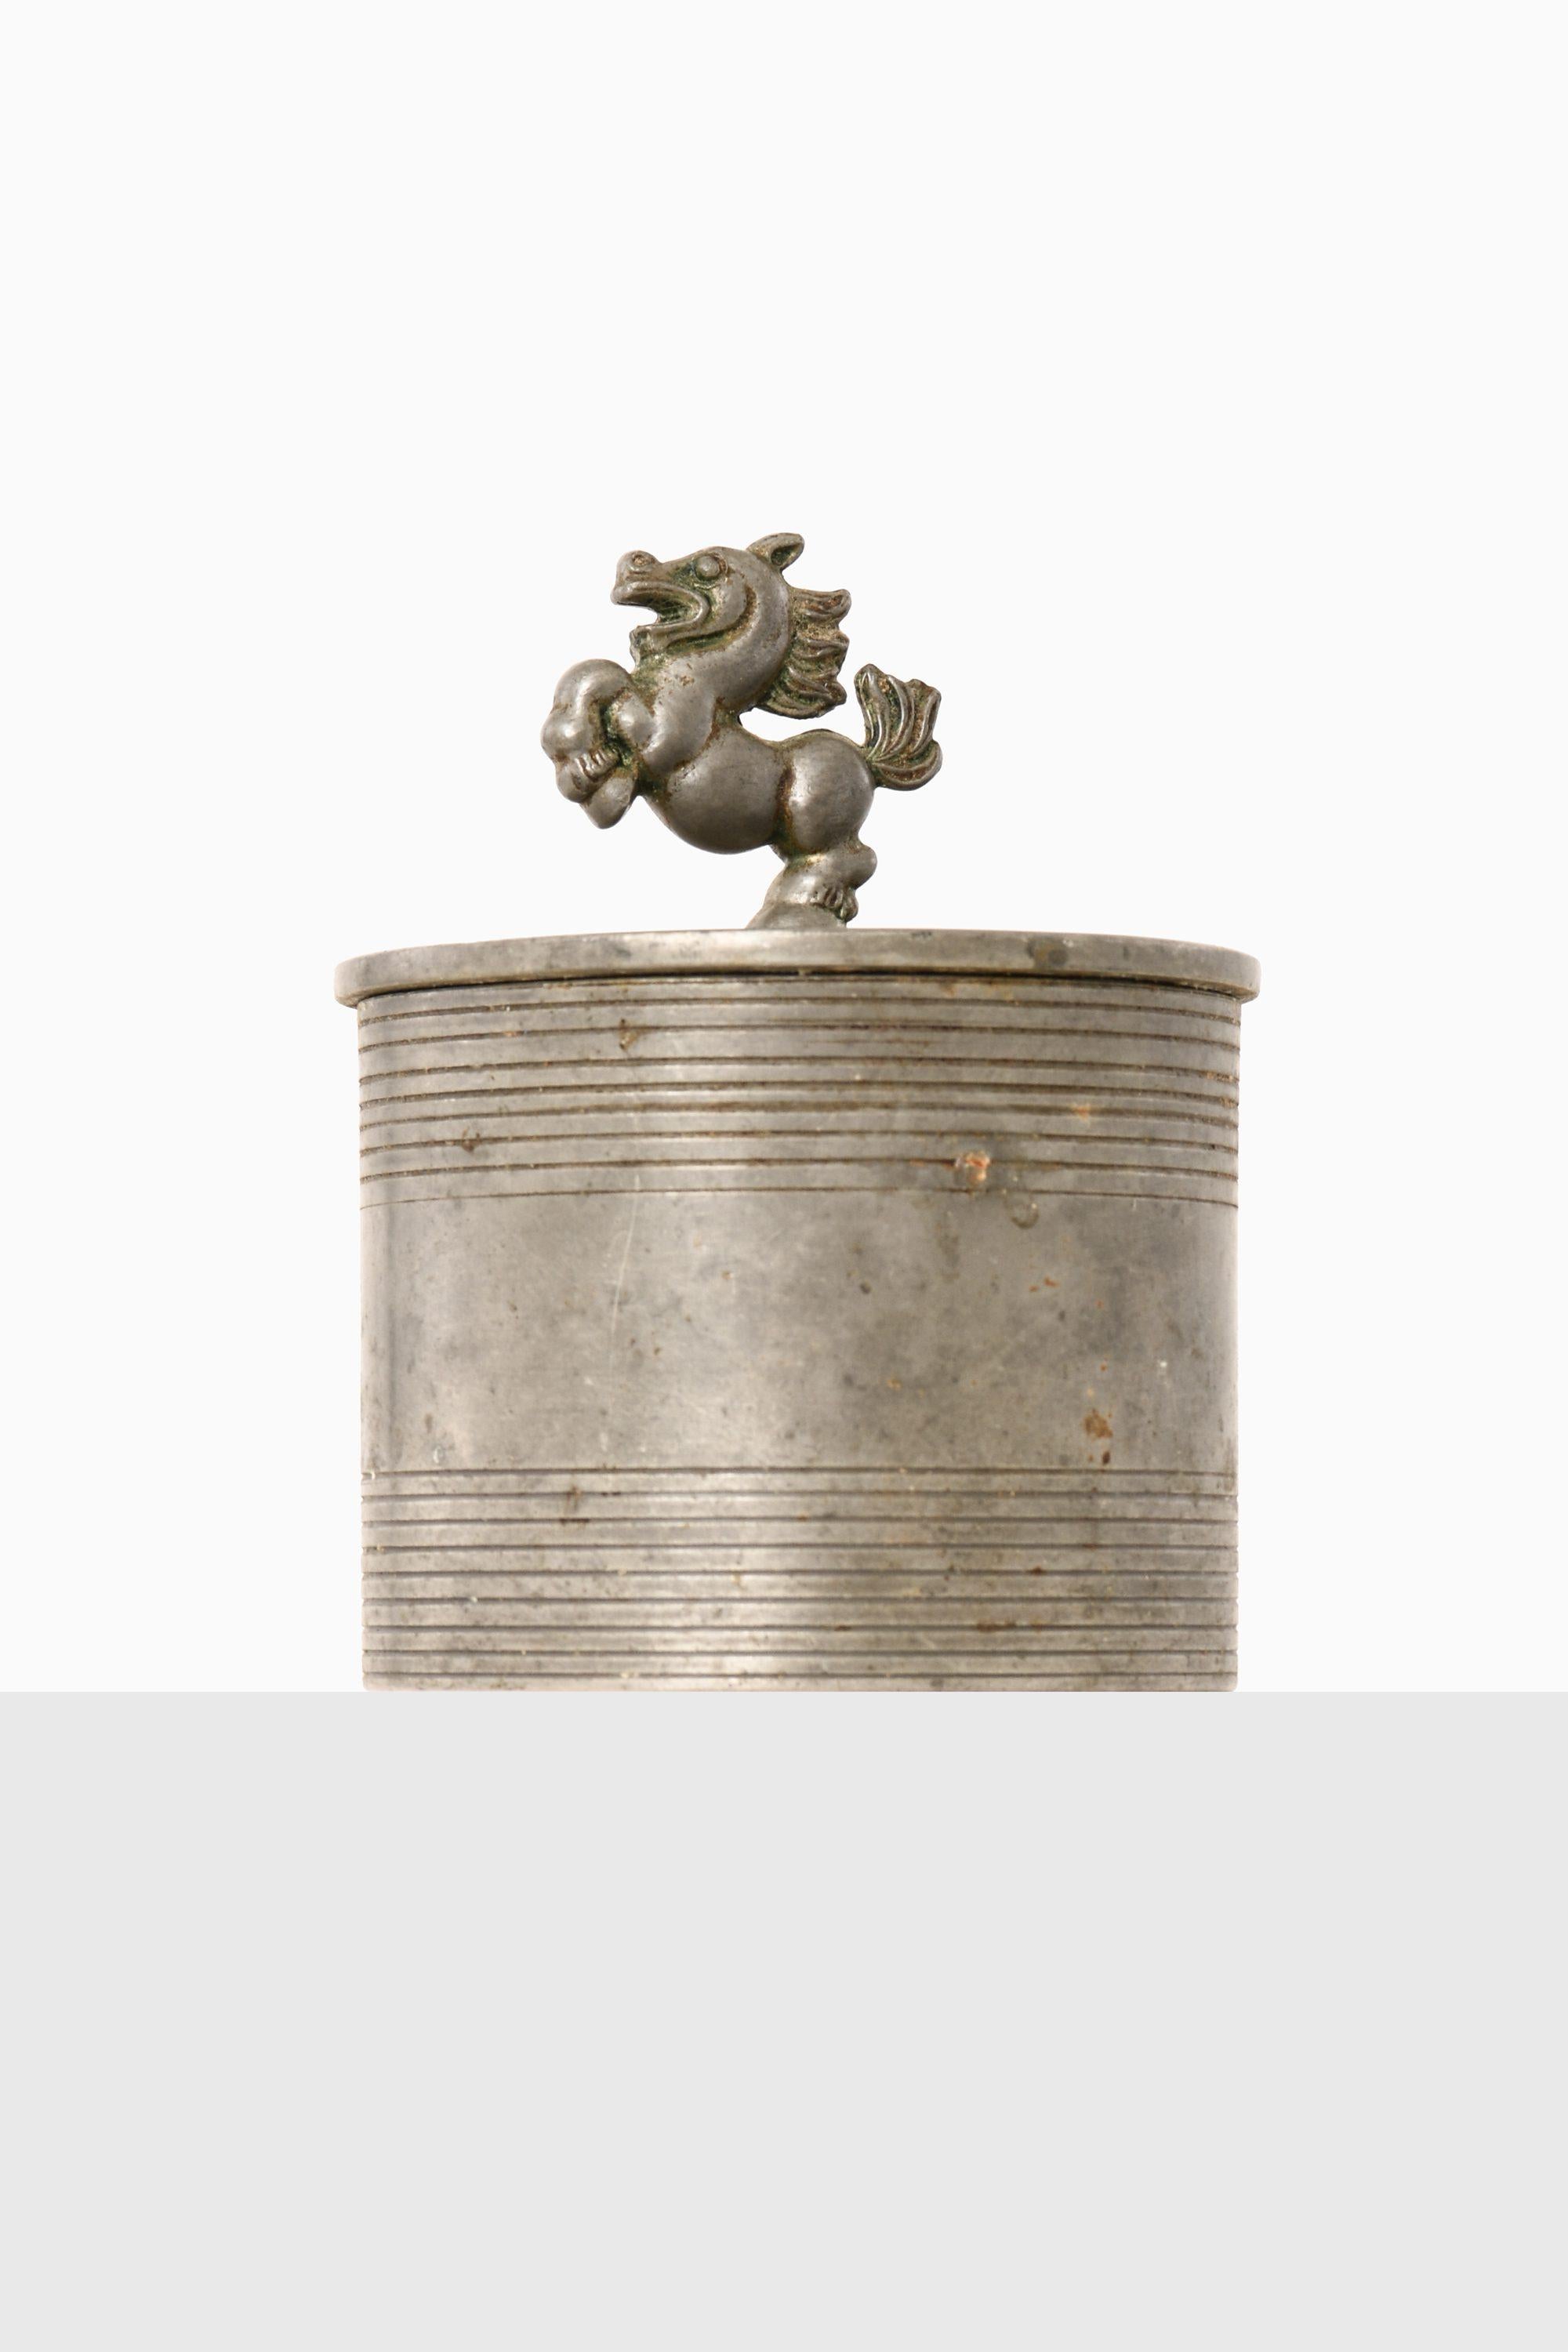 Pewter Jar Designed by Sylvia Stave, 1929

Additional Information:
Material: Pewter
Produced by C.G. Hallberg in Sweden
Dimensions: (W x D x H): 9 x 9 x 11 cm
Condition: Good vintage condition, with small signs of usage